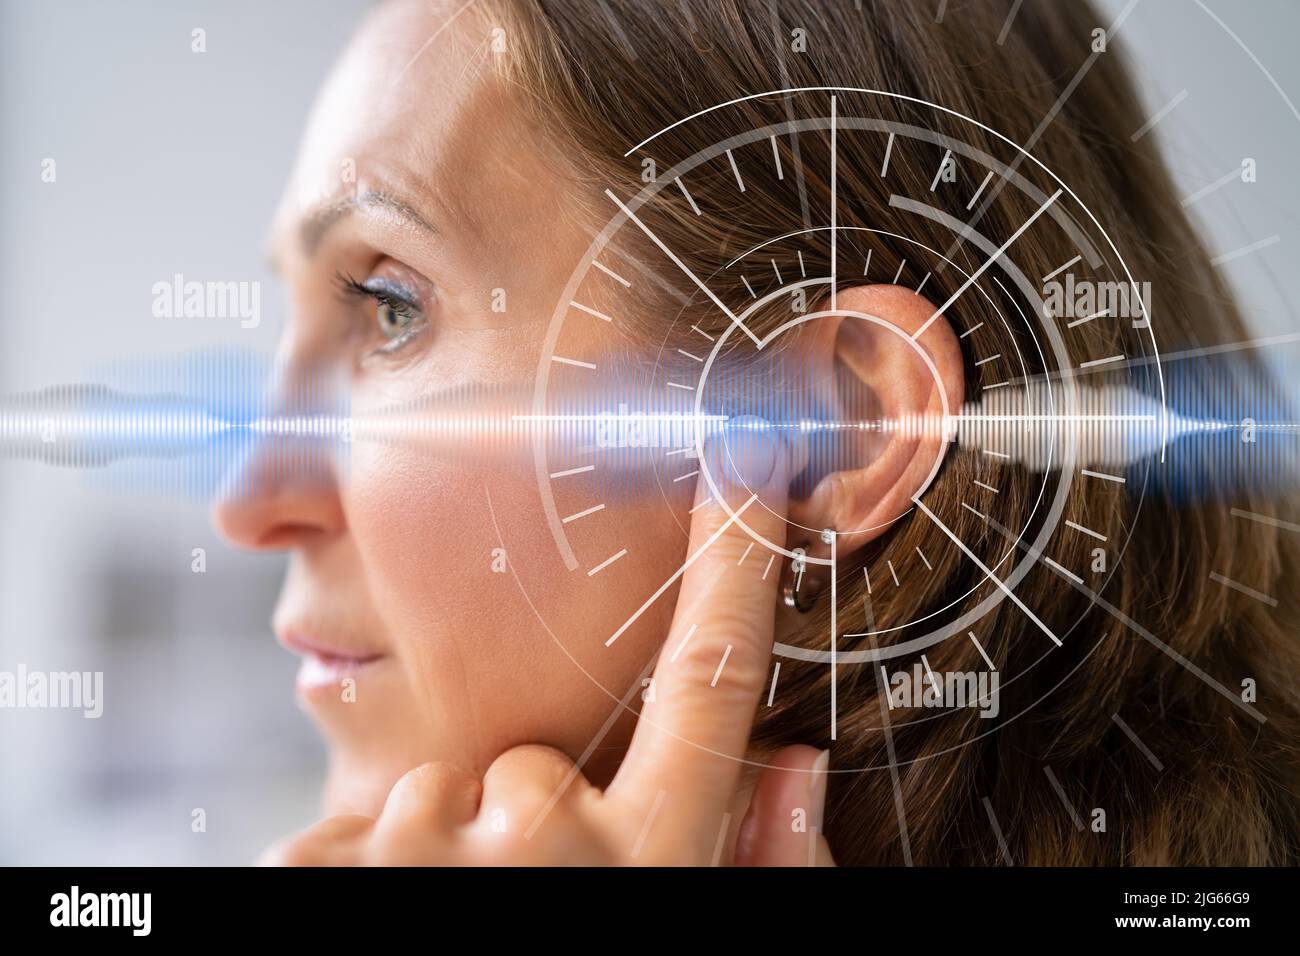 Hearing Aid And Deaf Care. Ear Photo Stock Photo